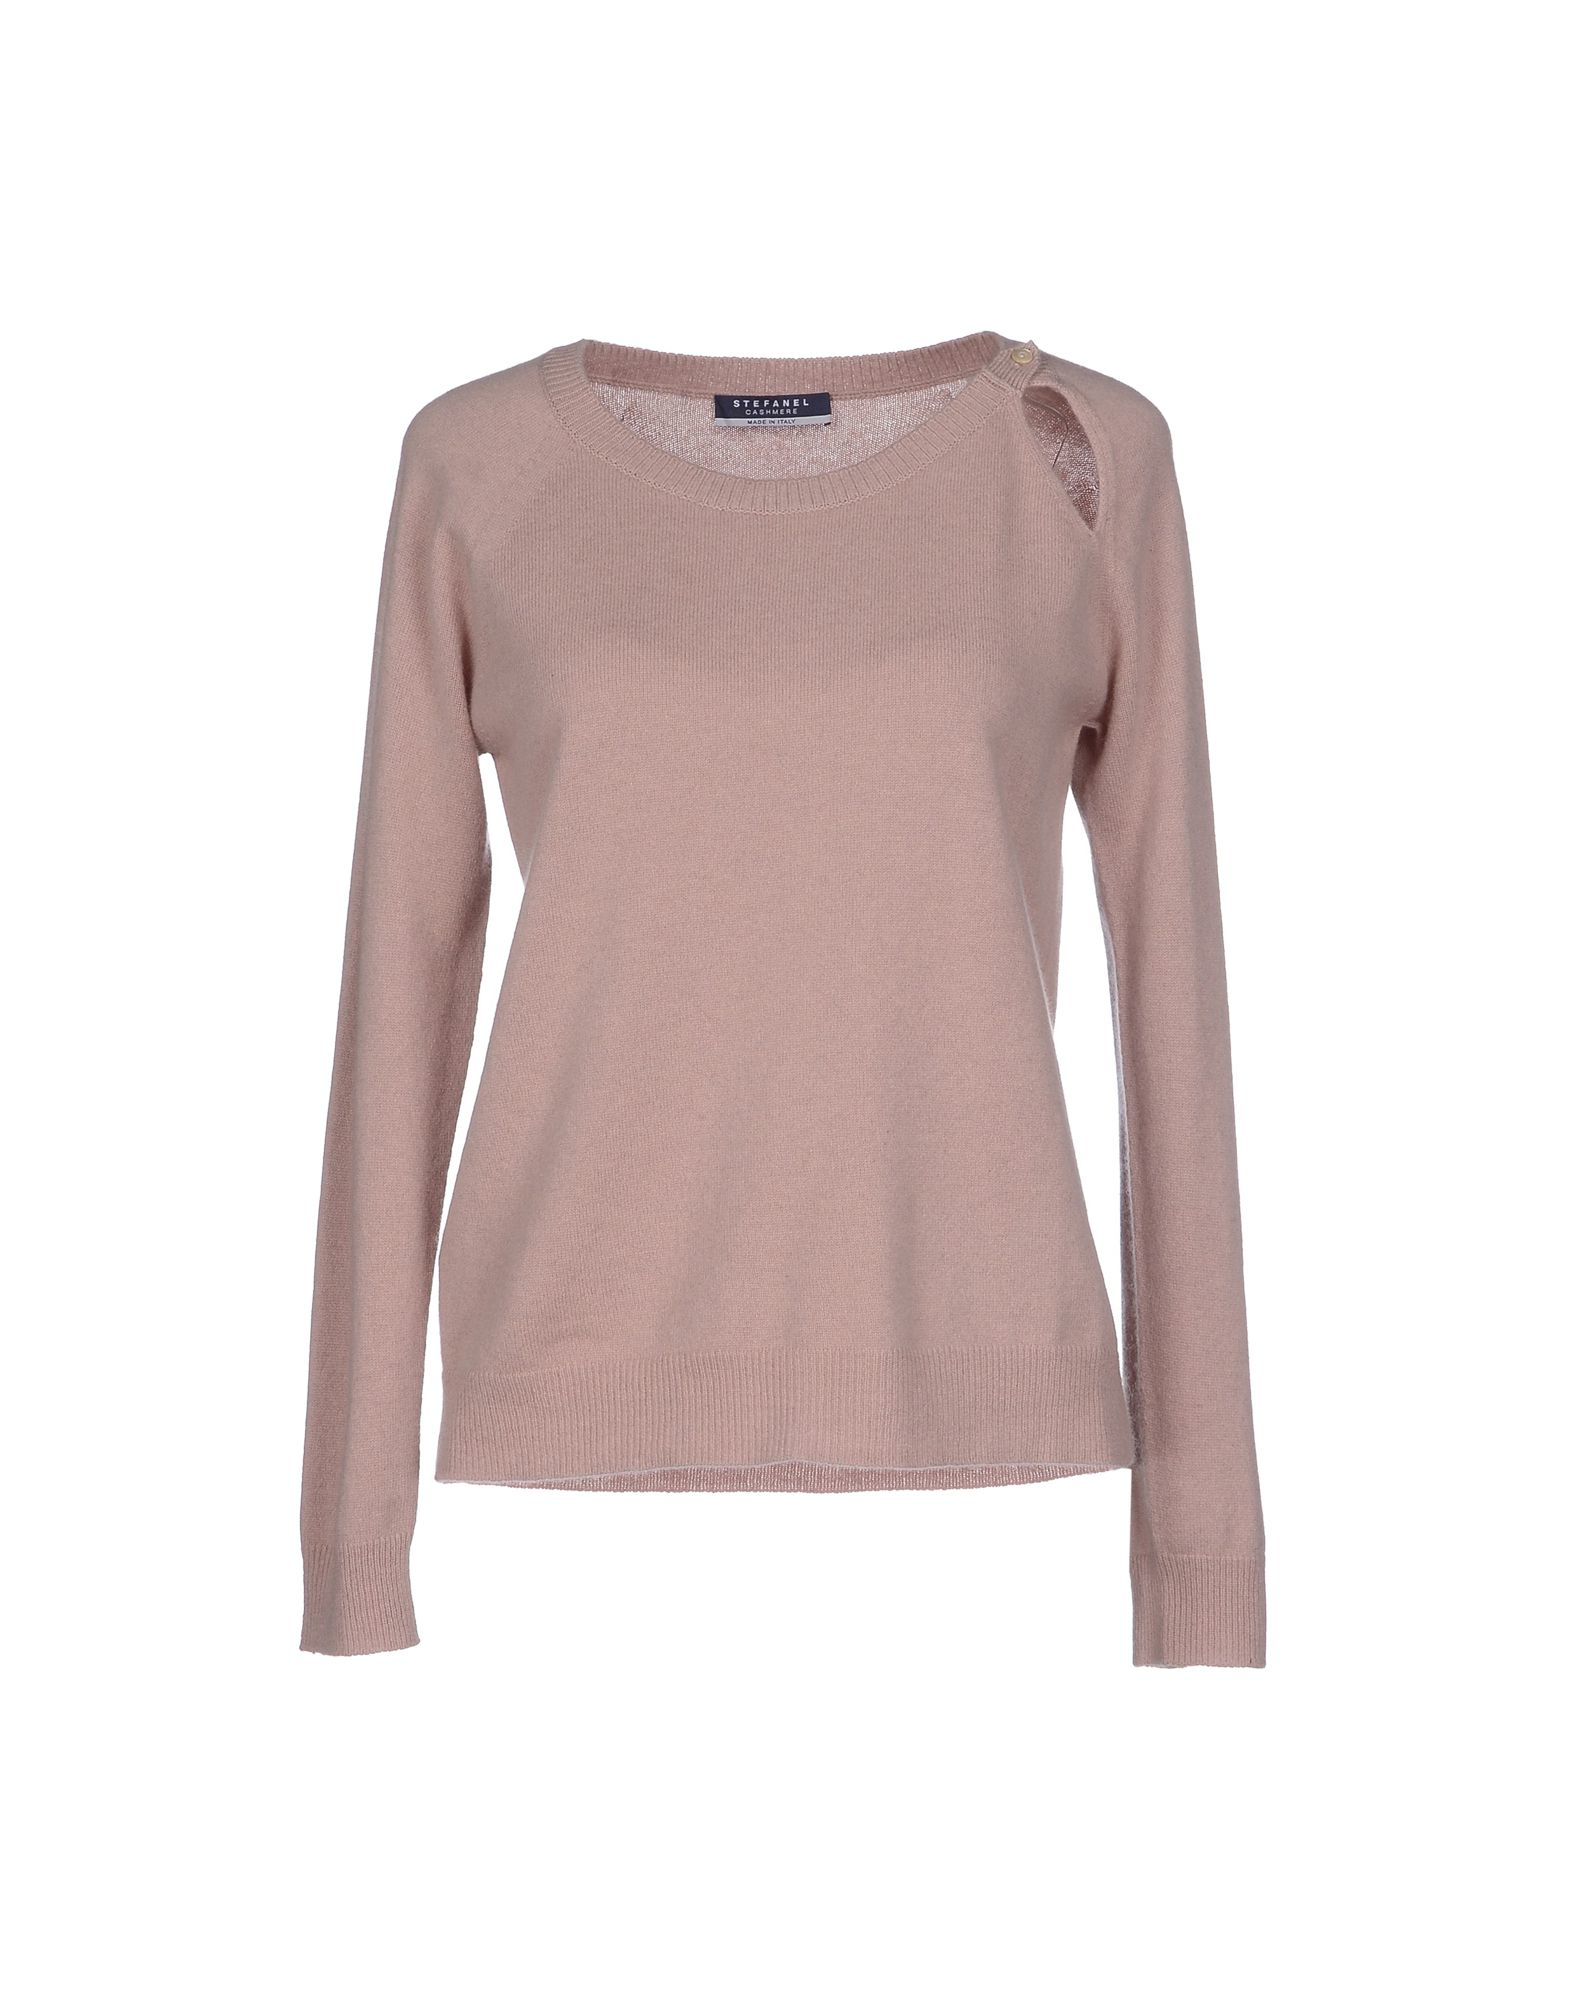 Stefanel Cashmere Sweater in Brown - Lyst